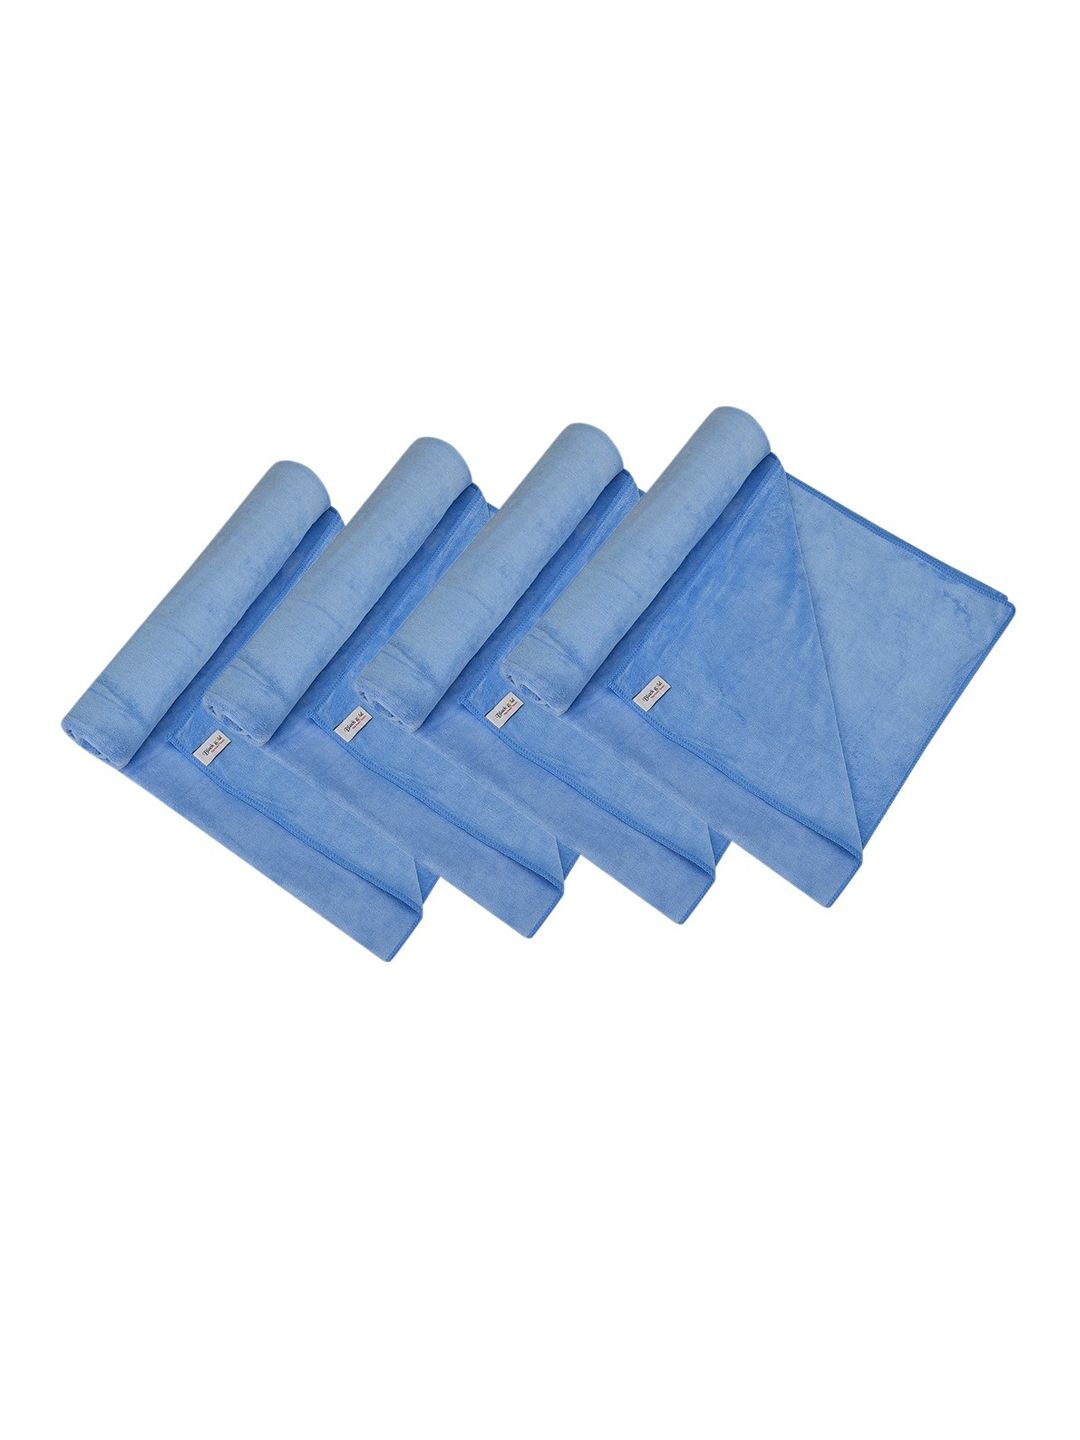 Black gold Set Of 4 Blue Solid 400 GSM Microfiber Bath Towels Price in India